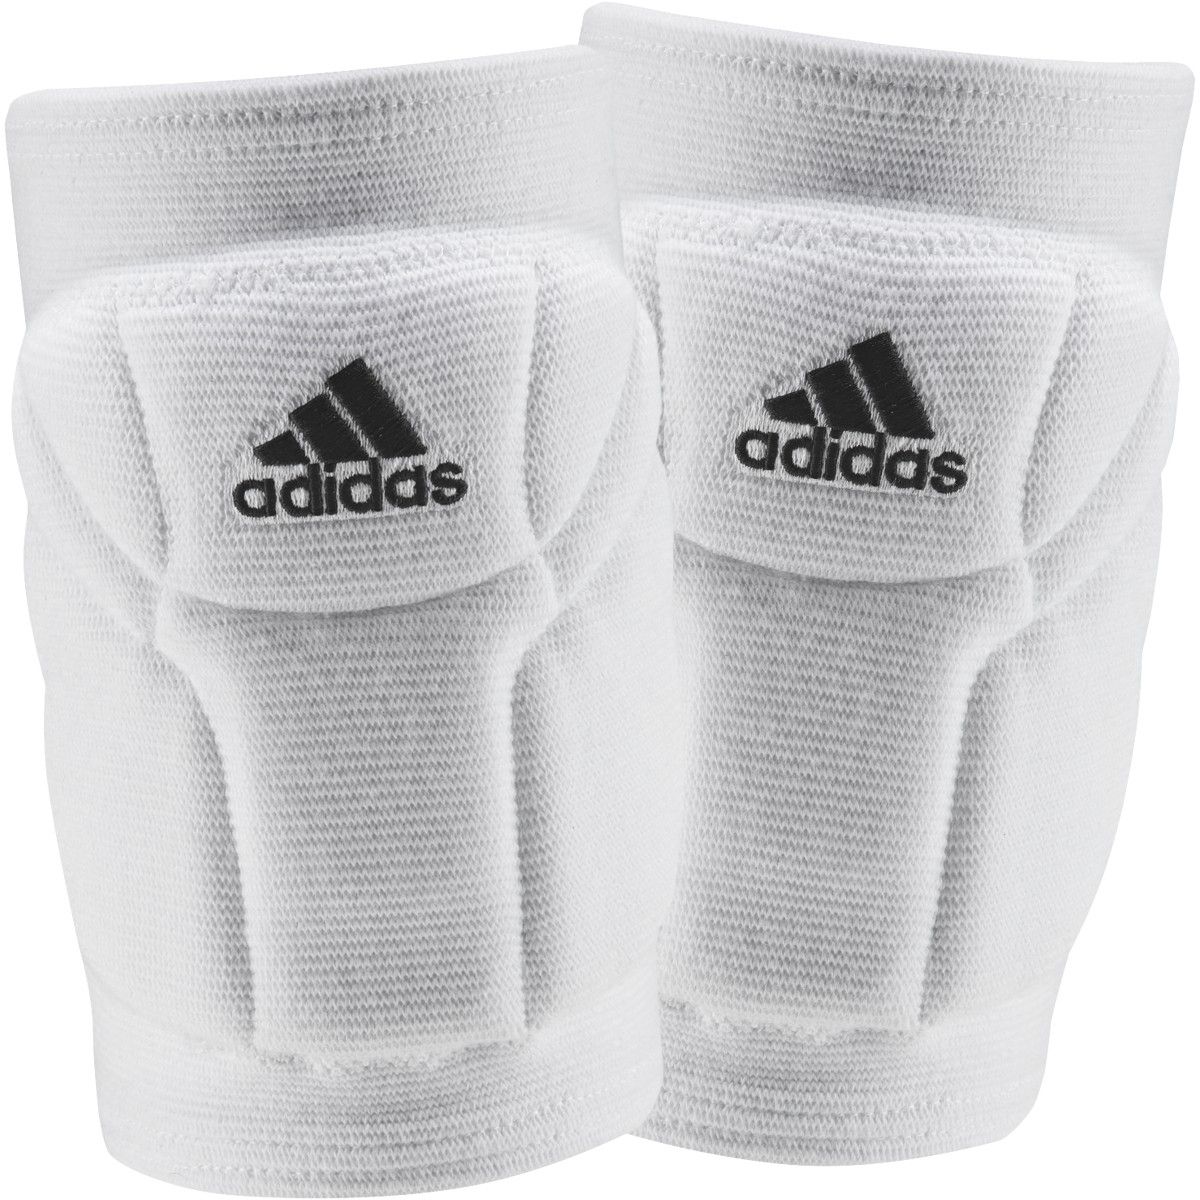 Fully Reversible Black/White Volleyball Knee Pads Elite Athletics Brand New 